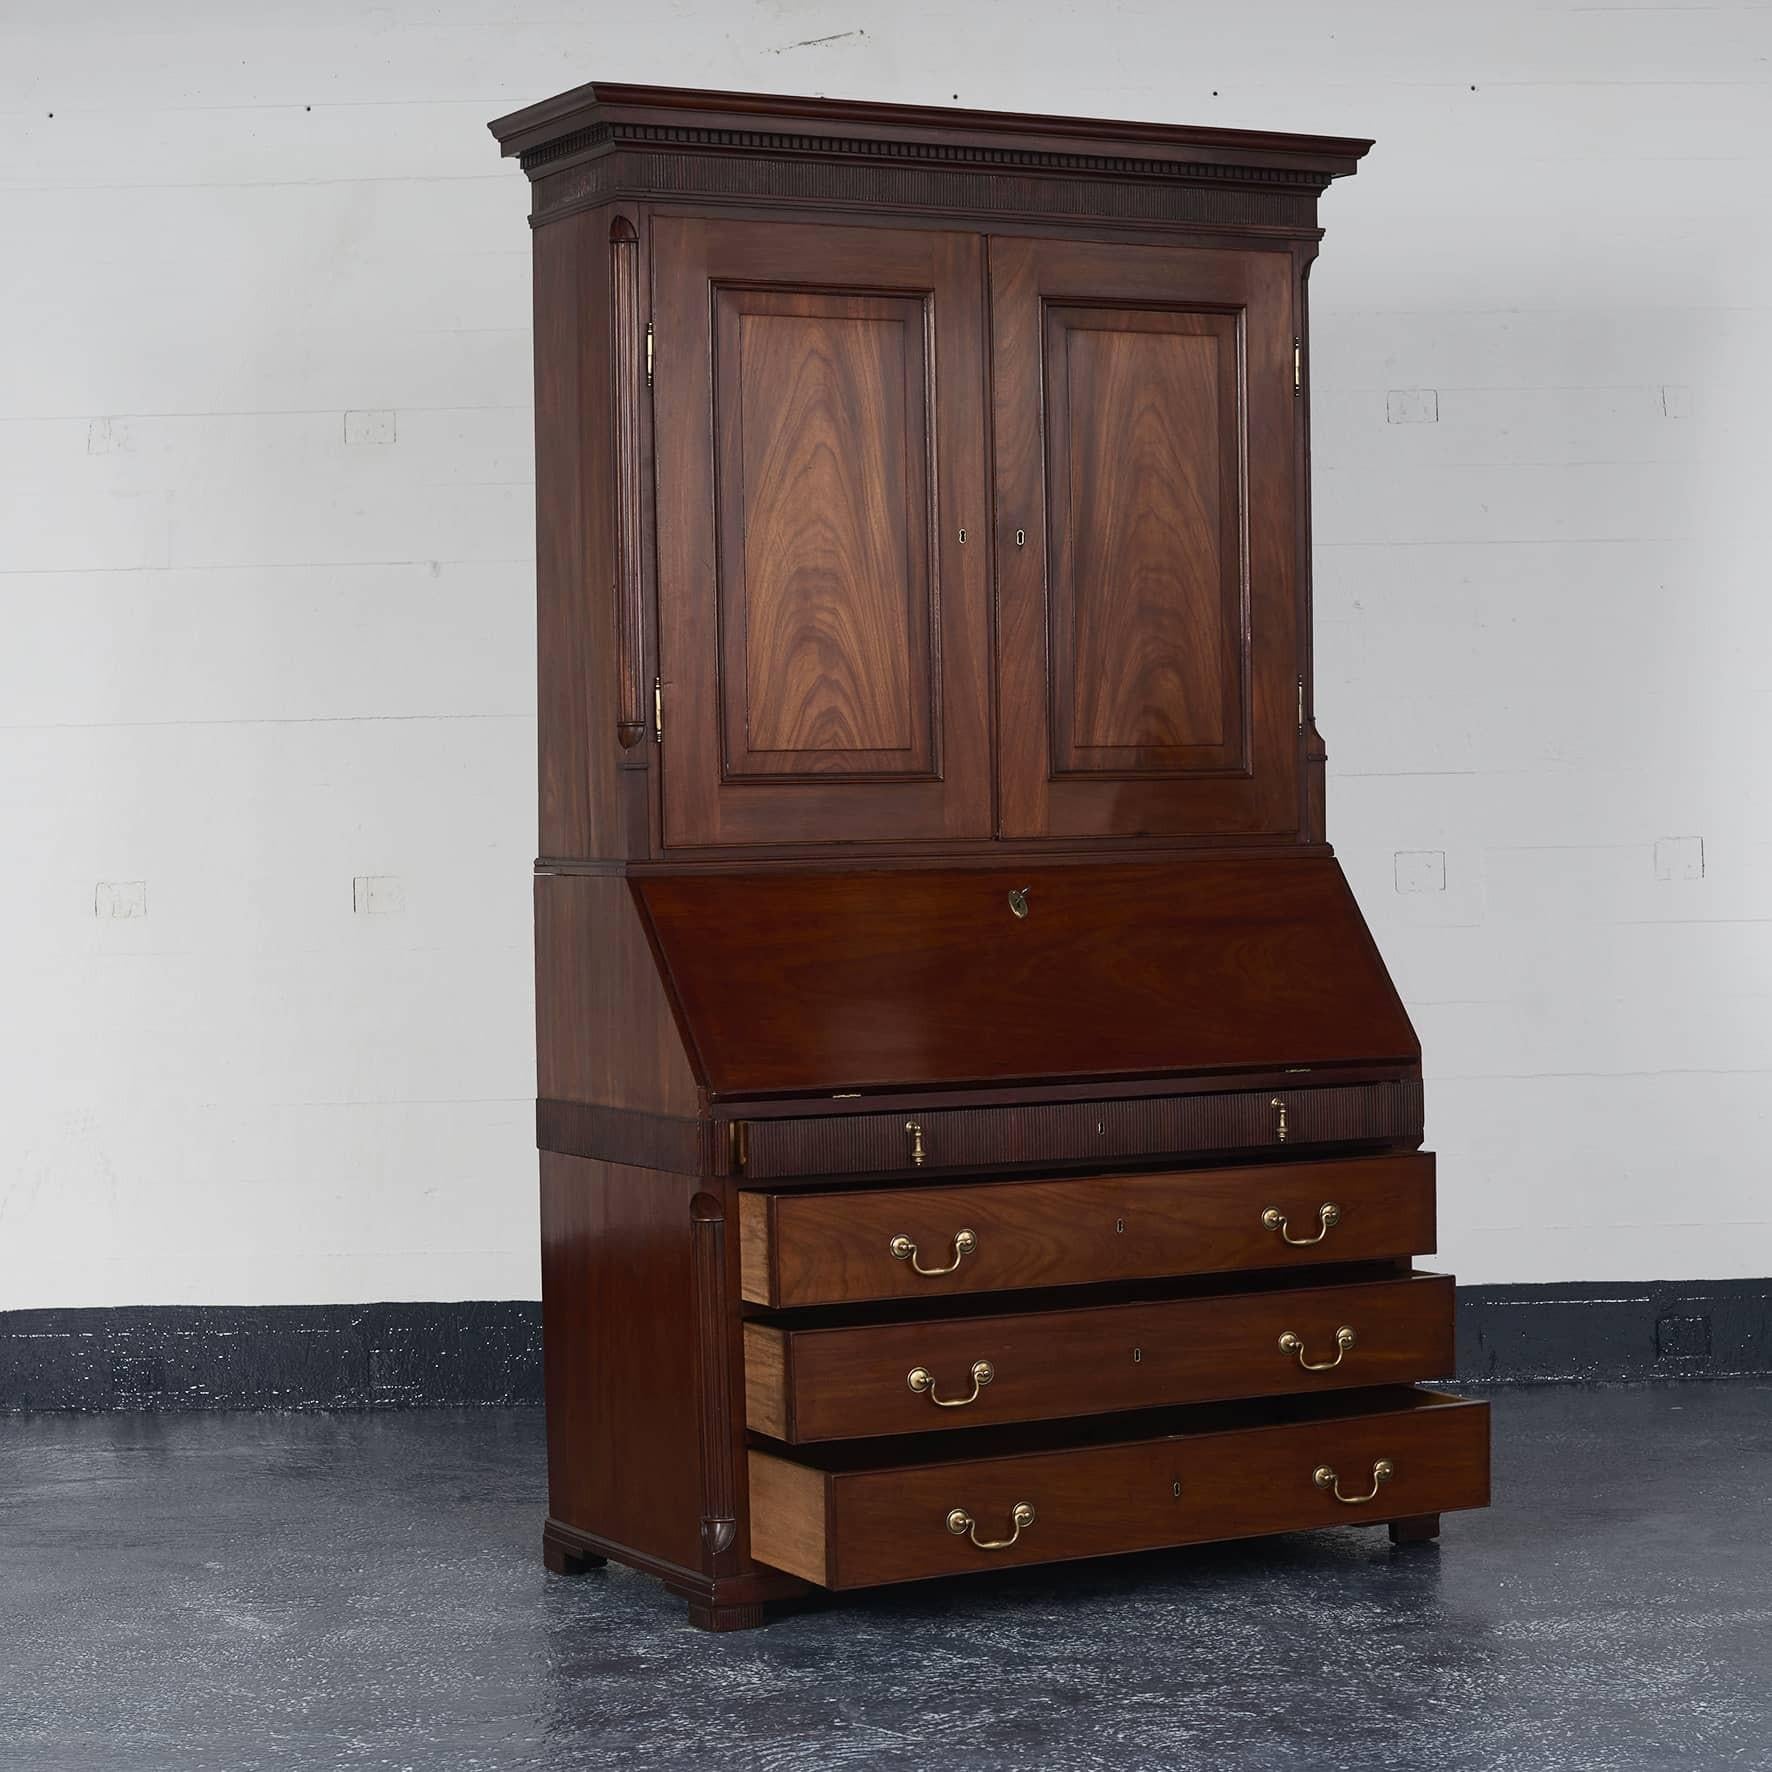 Elegant Louis XVI bureau / Secretaire in 3 parts. 
Top with tooth cut under profiled top list.
Pair of doors with fillings, sides with profiled quartz columns.
Bottom part with sloping writing flap behind which numerous small drawers in lemon tree,